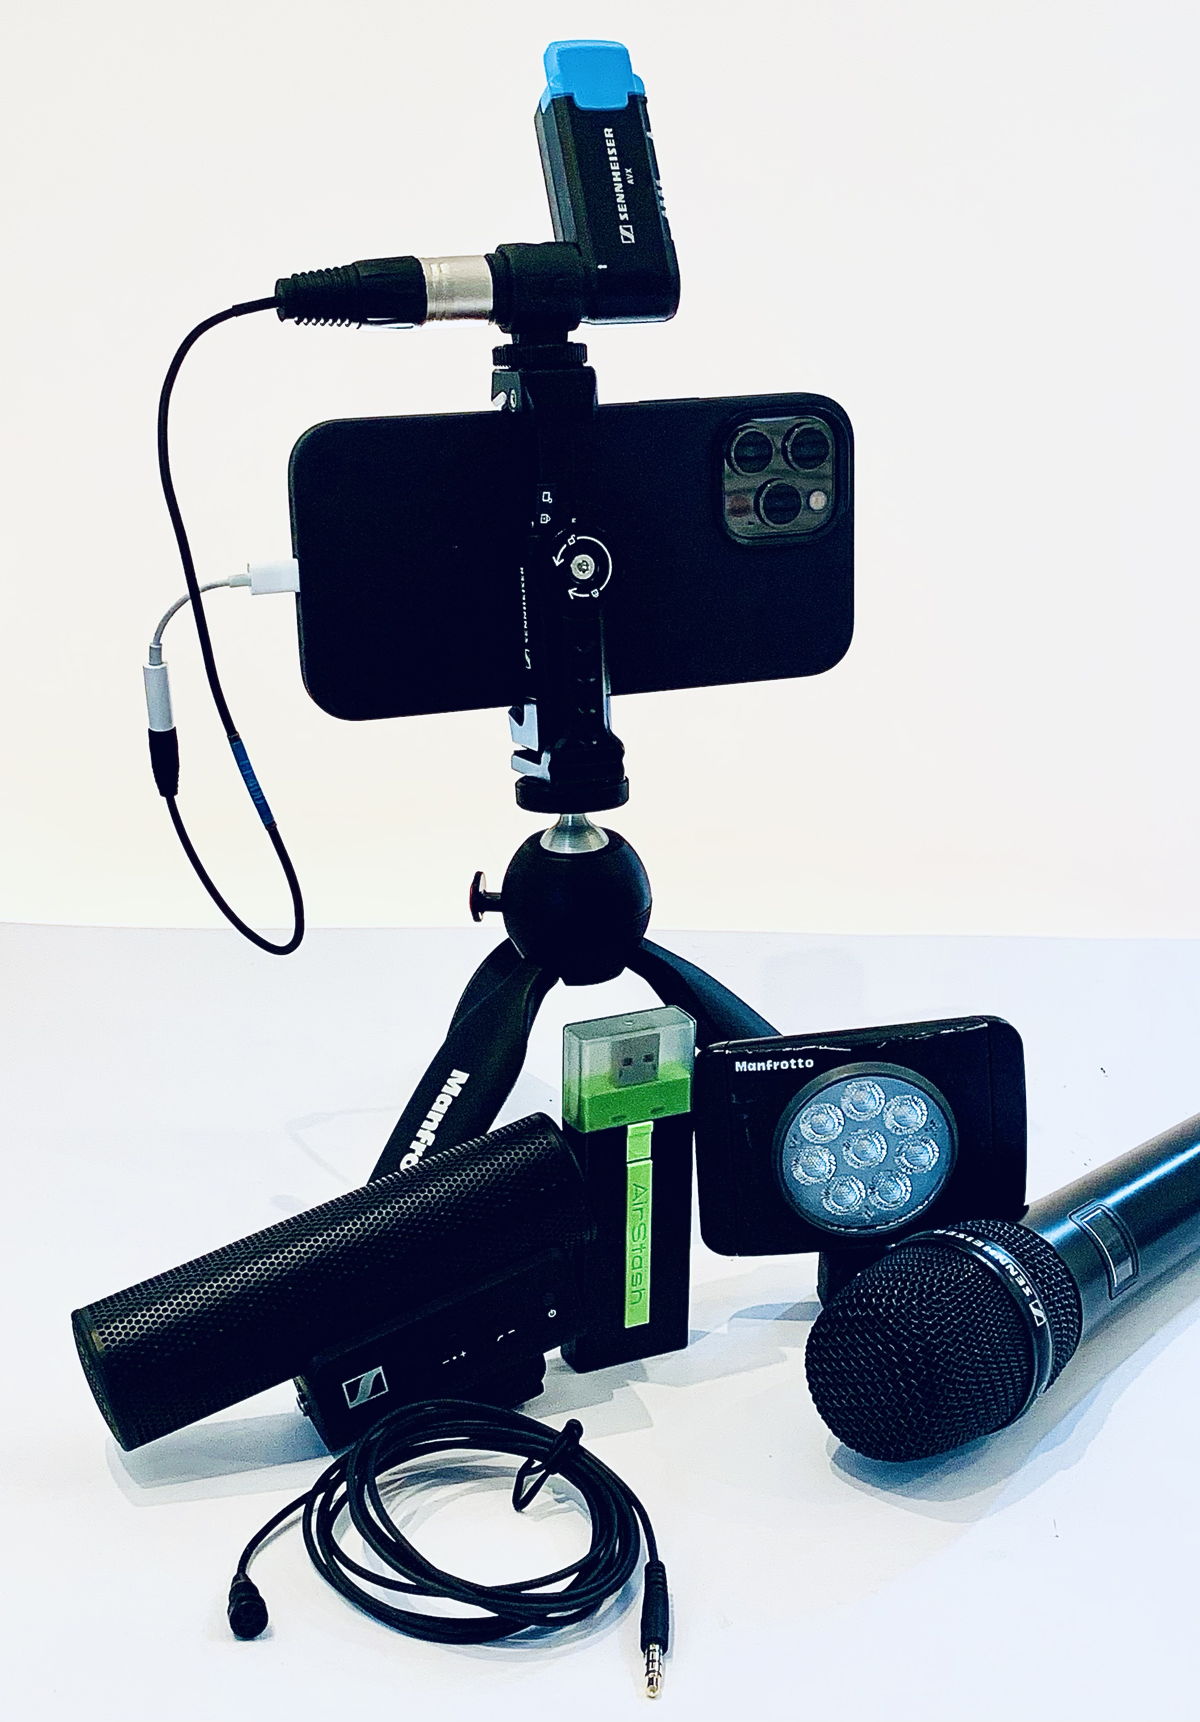 Figure 12.   Advanced Kit  with iPhone 12 Pro Max, MKE 400 Mobile Kit (includes Manfrotto PIXI and Smartphone Clamp), AVX wireless microphone system, XS Lav Mobile clip-on mic, Manfrotto Lumimuse Light, Airstash, TRS and TRRS to Lightning adaptors  (Photo credit: Ivo Burum)